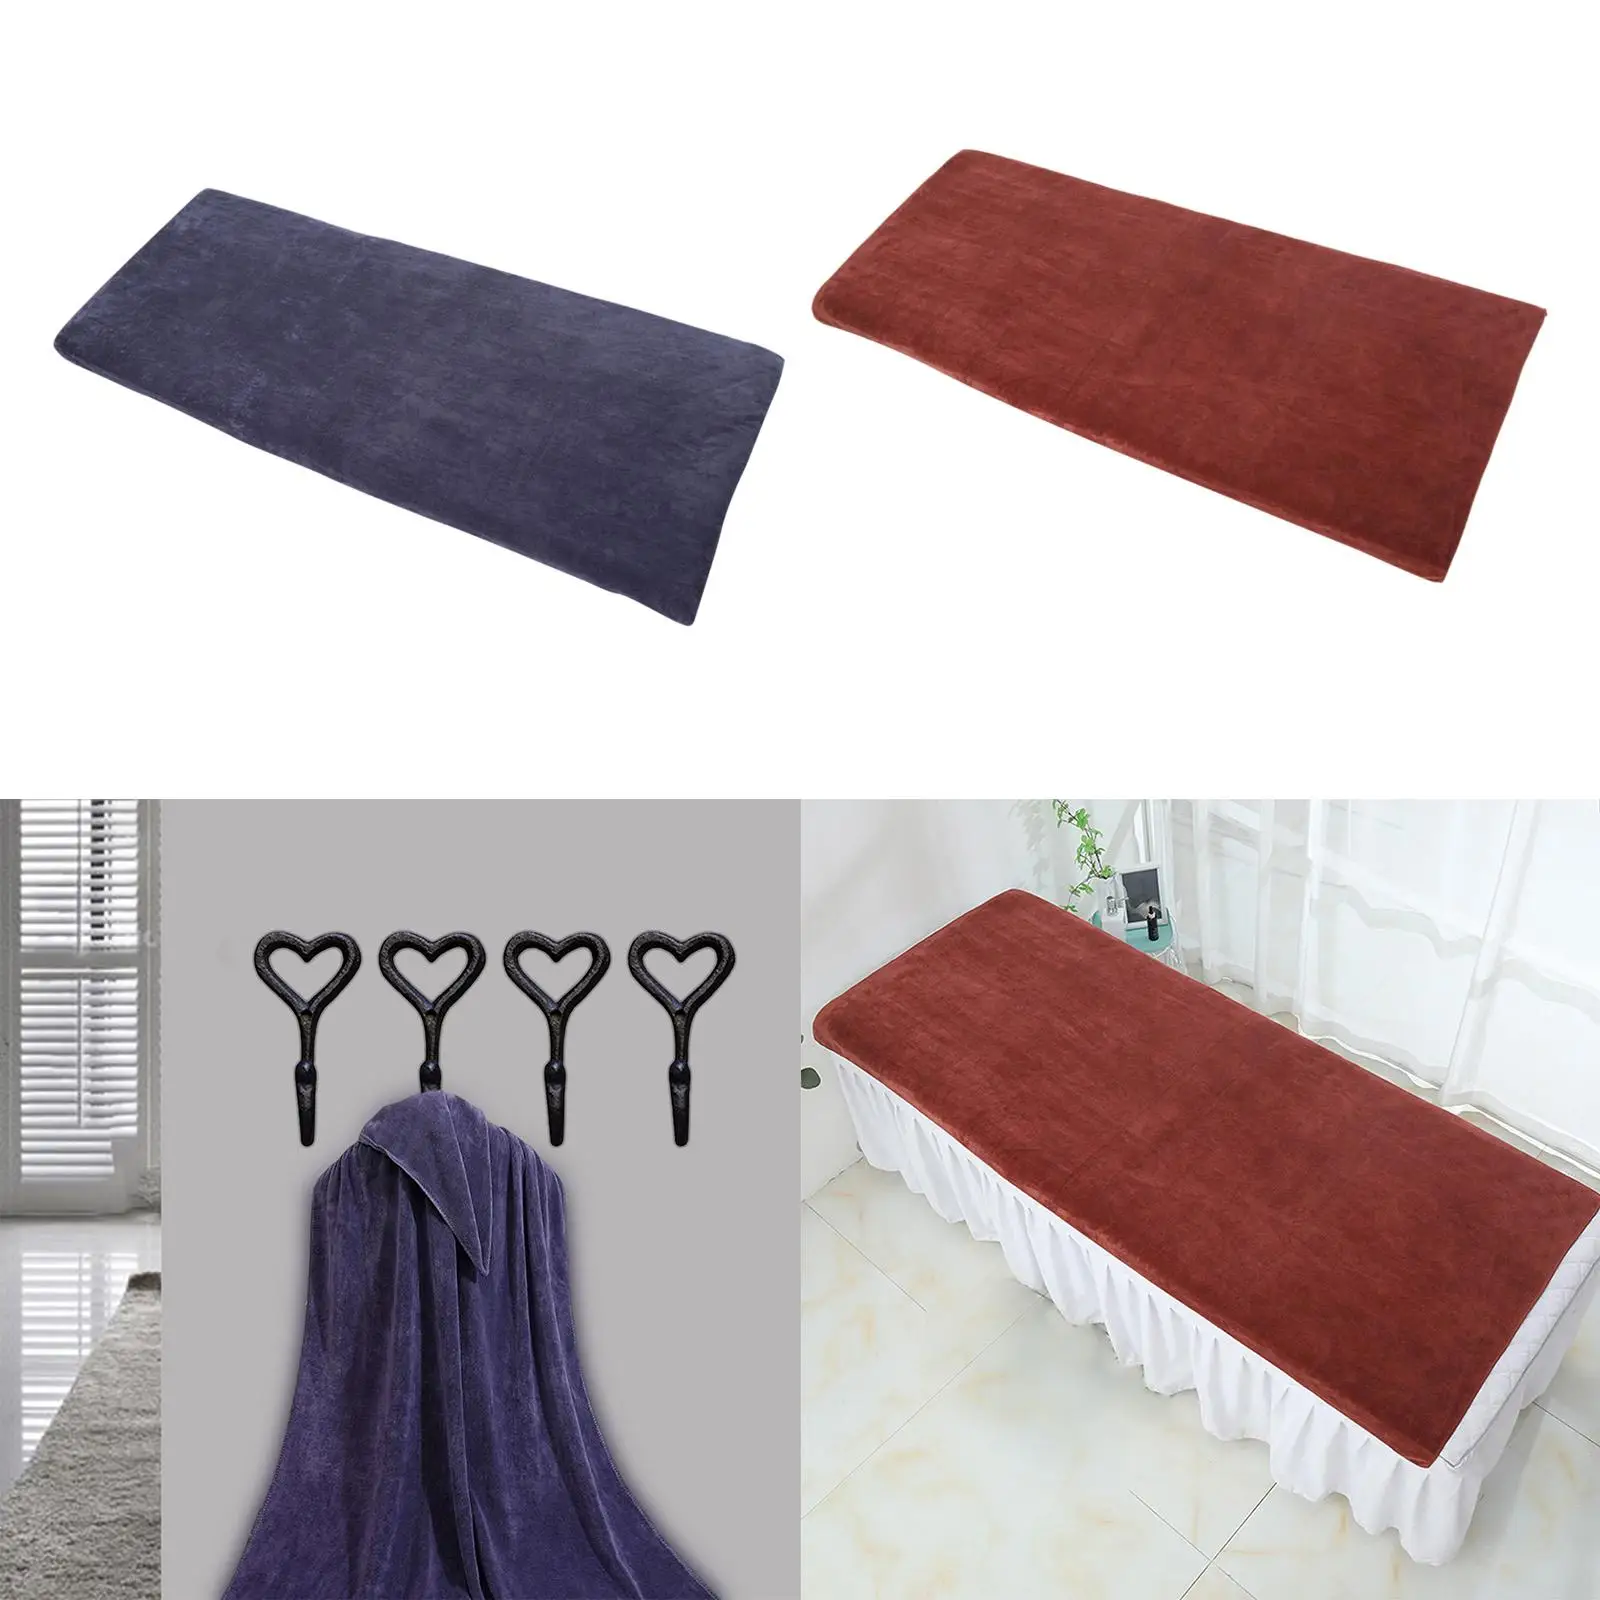 Massage Table Sheet Covers Polyester Fiber Coverlet Durable Easy to Use Towel Protector Reusable for Beauty Salon Massage Bed